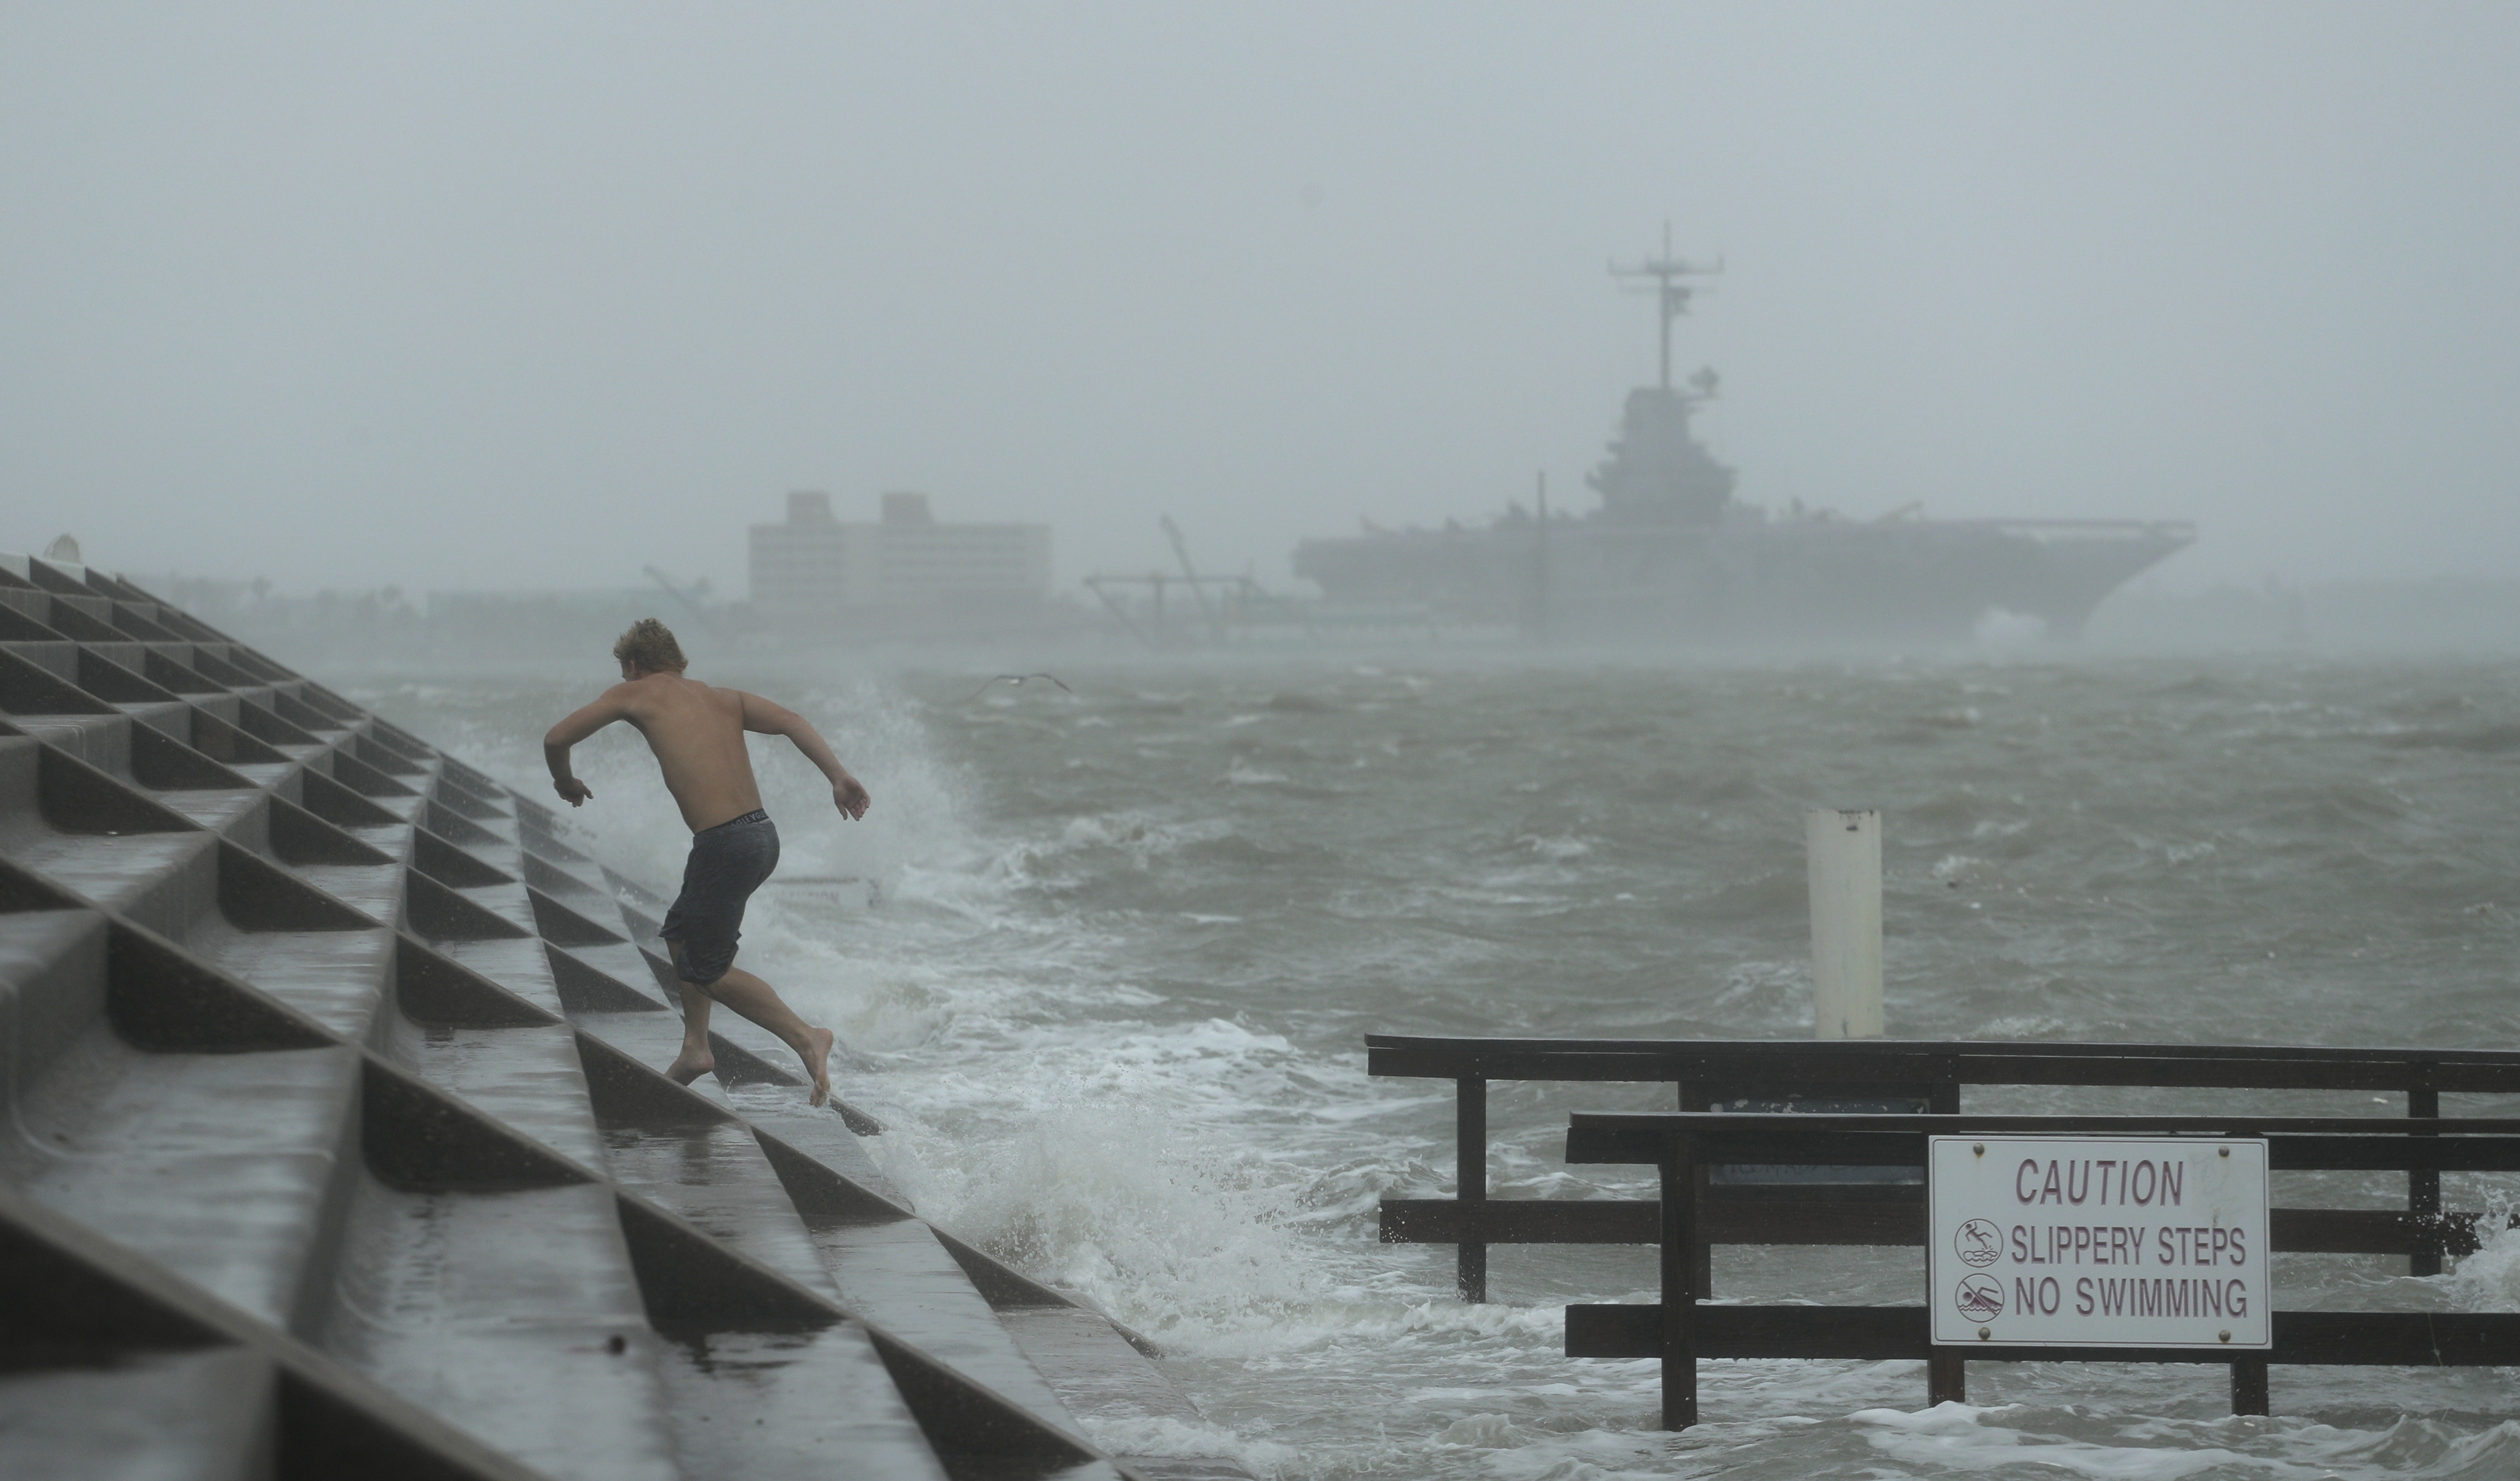 A man jumps from a wave as Hurricane Hanna begins to make landfall, Saturday, July 25, 2020, in Corpus Christi, Texas.   The National Hurricane Center said Saturday morning that Hanna's maximum sustained winds had increased and that it was expected to make landfall Saturday afternoon or early evening. Photo: AP